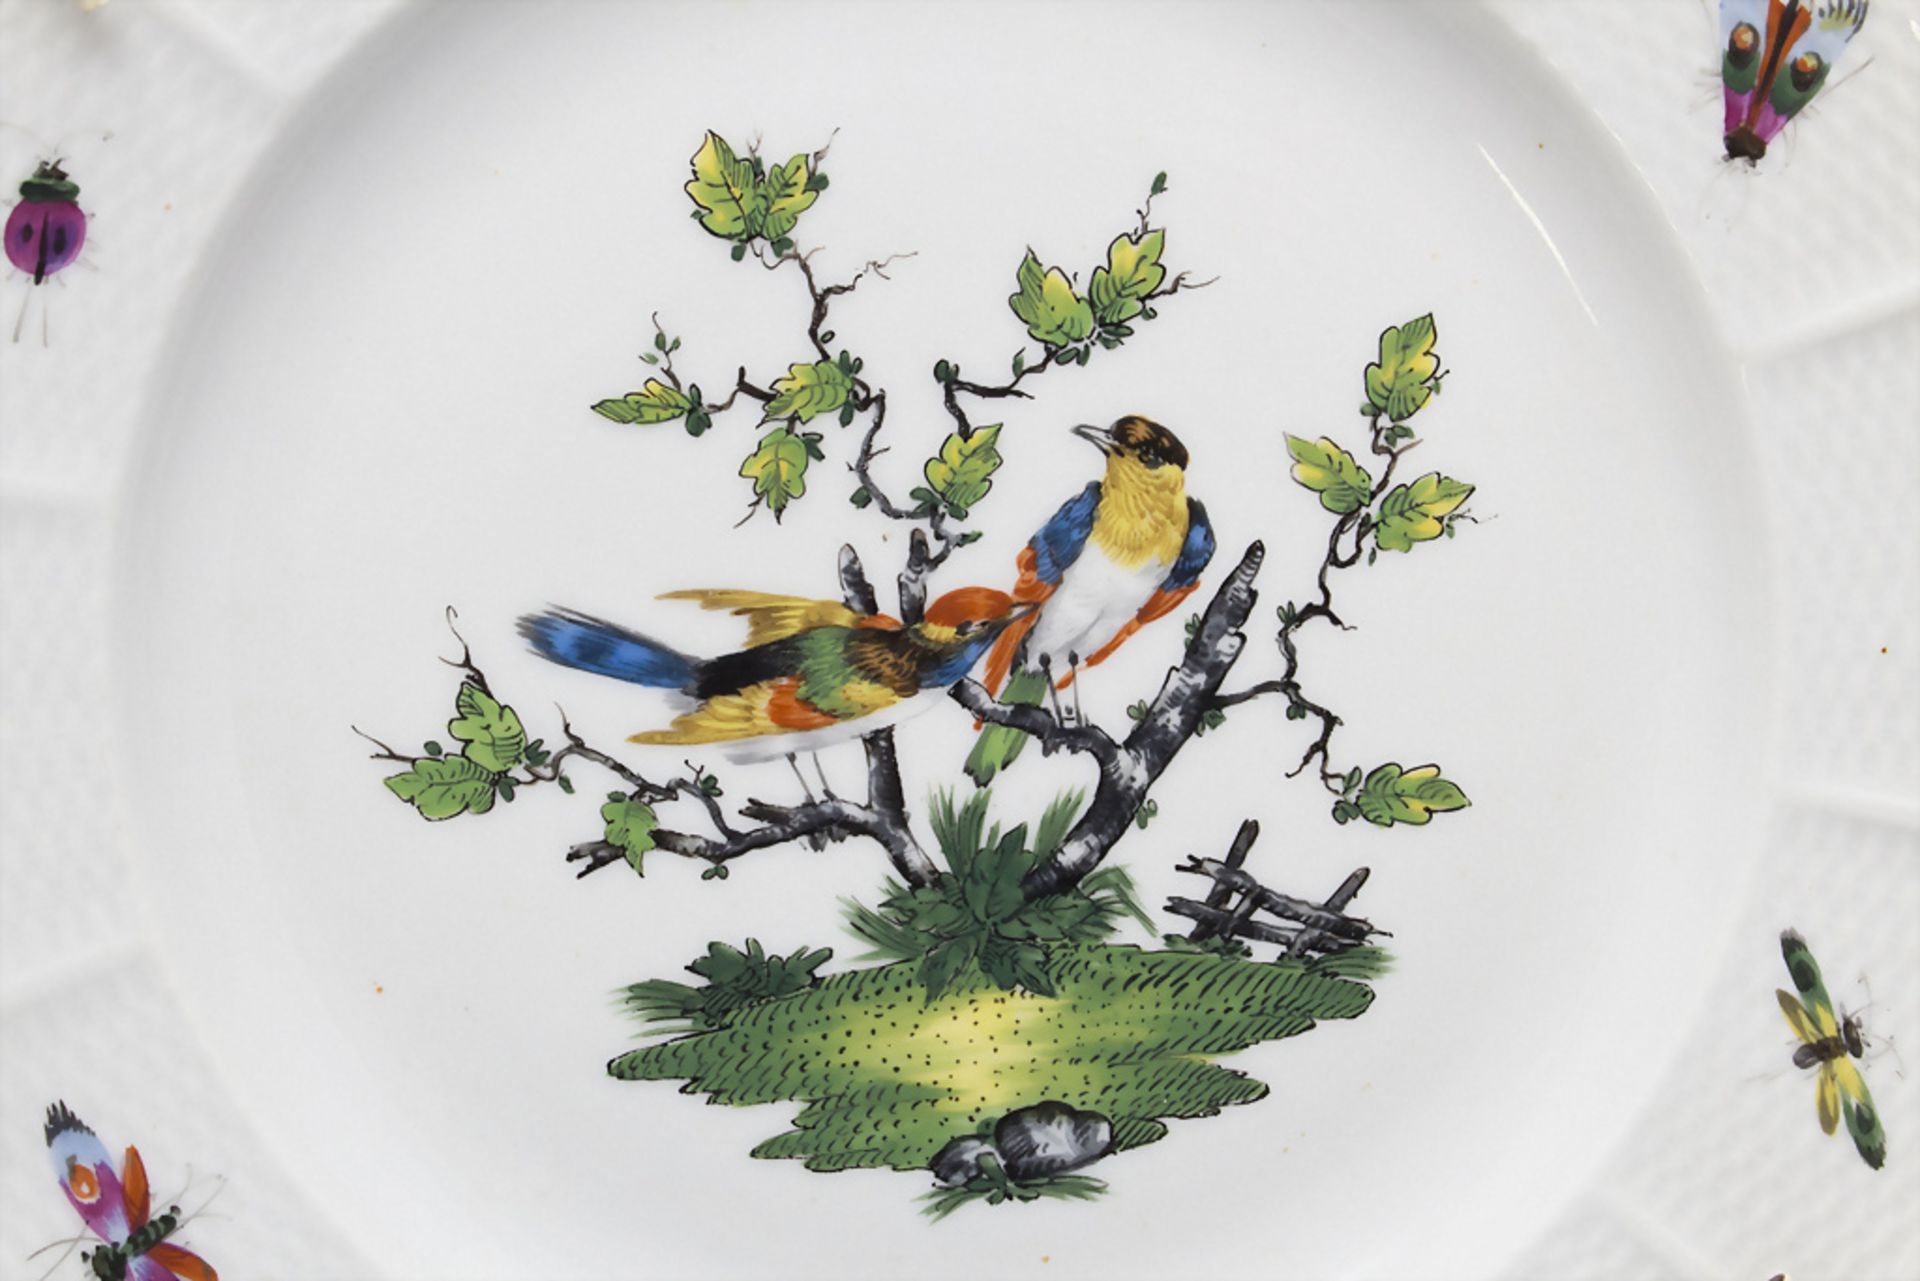 Teller mit Vogel- und Insektenmalerei / A plate with birds and insect paintings, Ludwigsburg, ... - Bild 2 aus 4